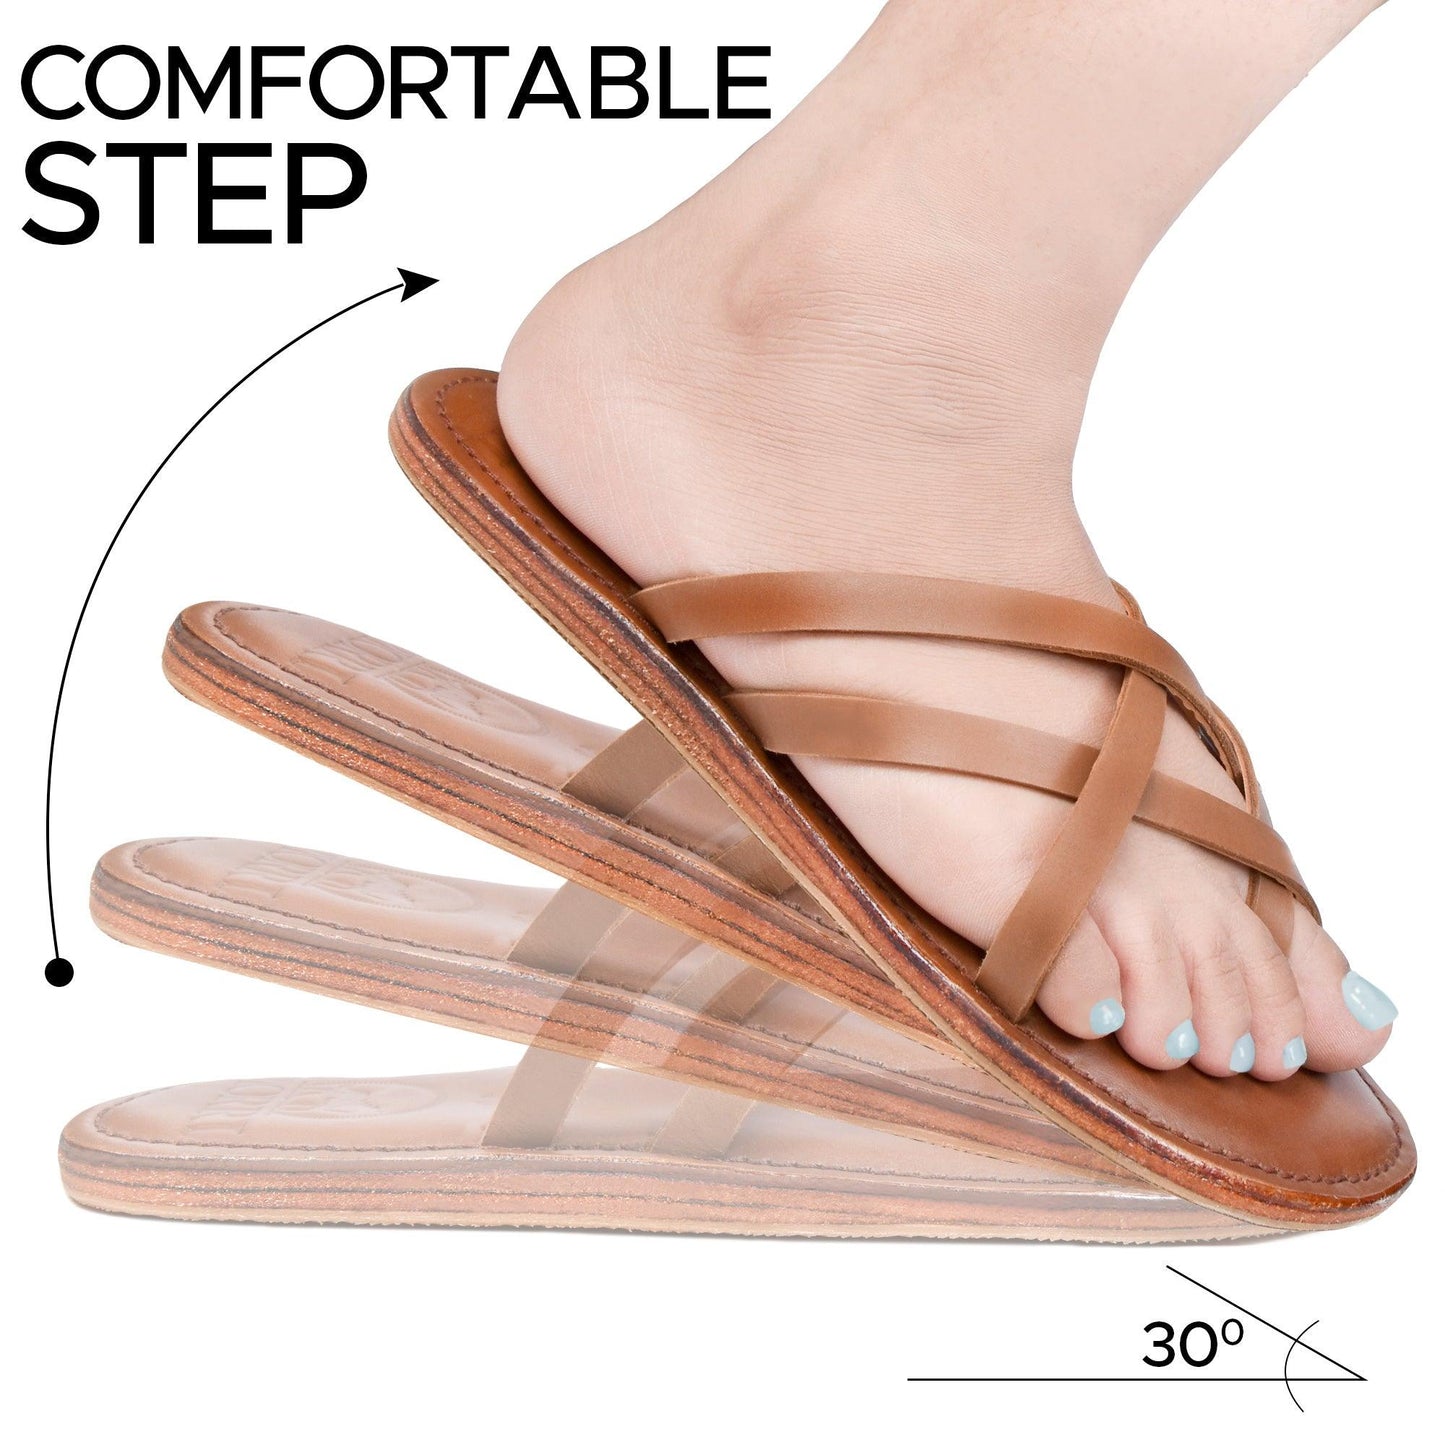 PIORRI by Aerothotic - Dione Women’s Split Toe Strappy Natural Leather Slide Sandals - LK2107